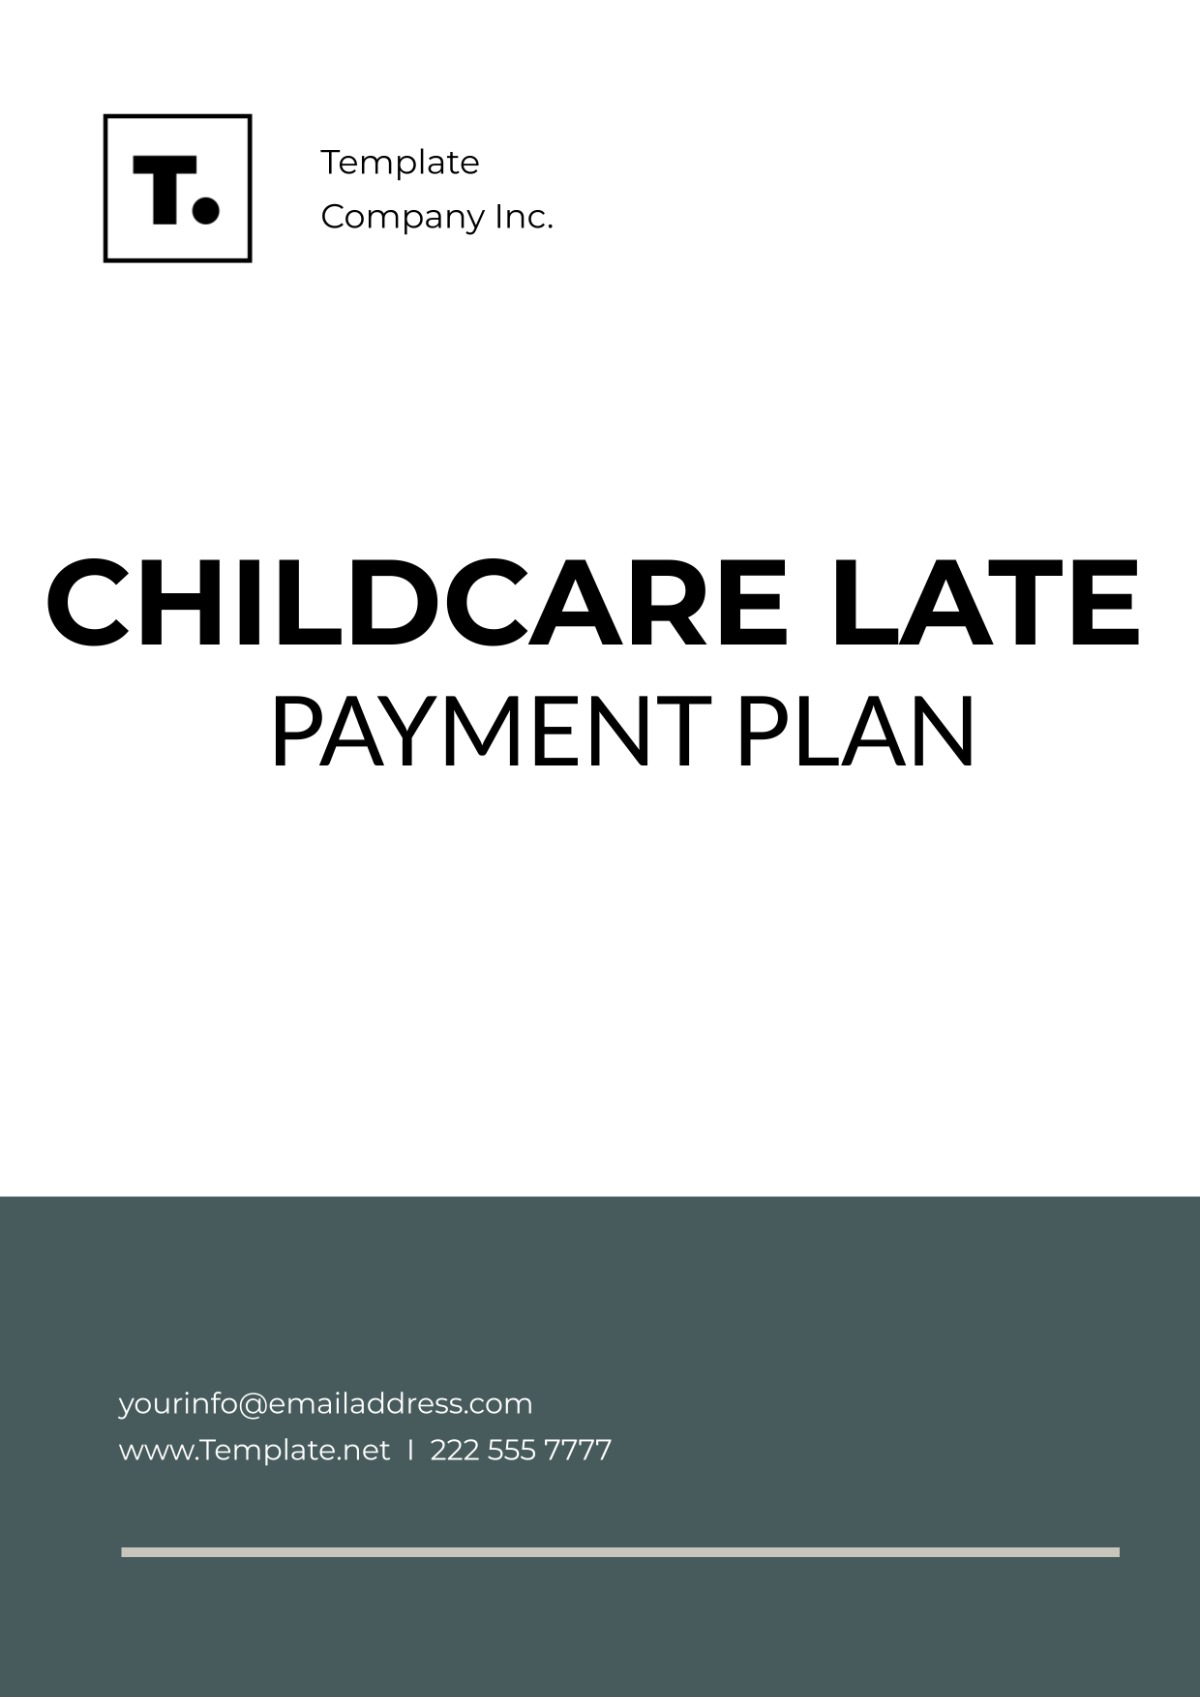 Free Childcare Late Payment Plan Template